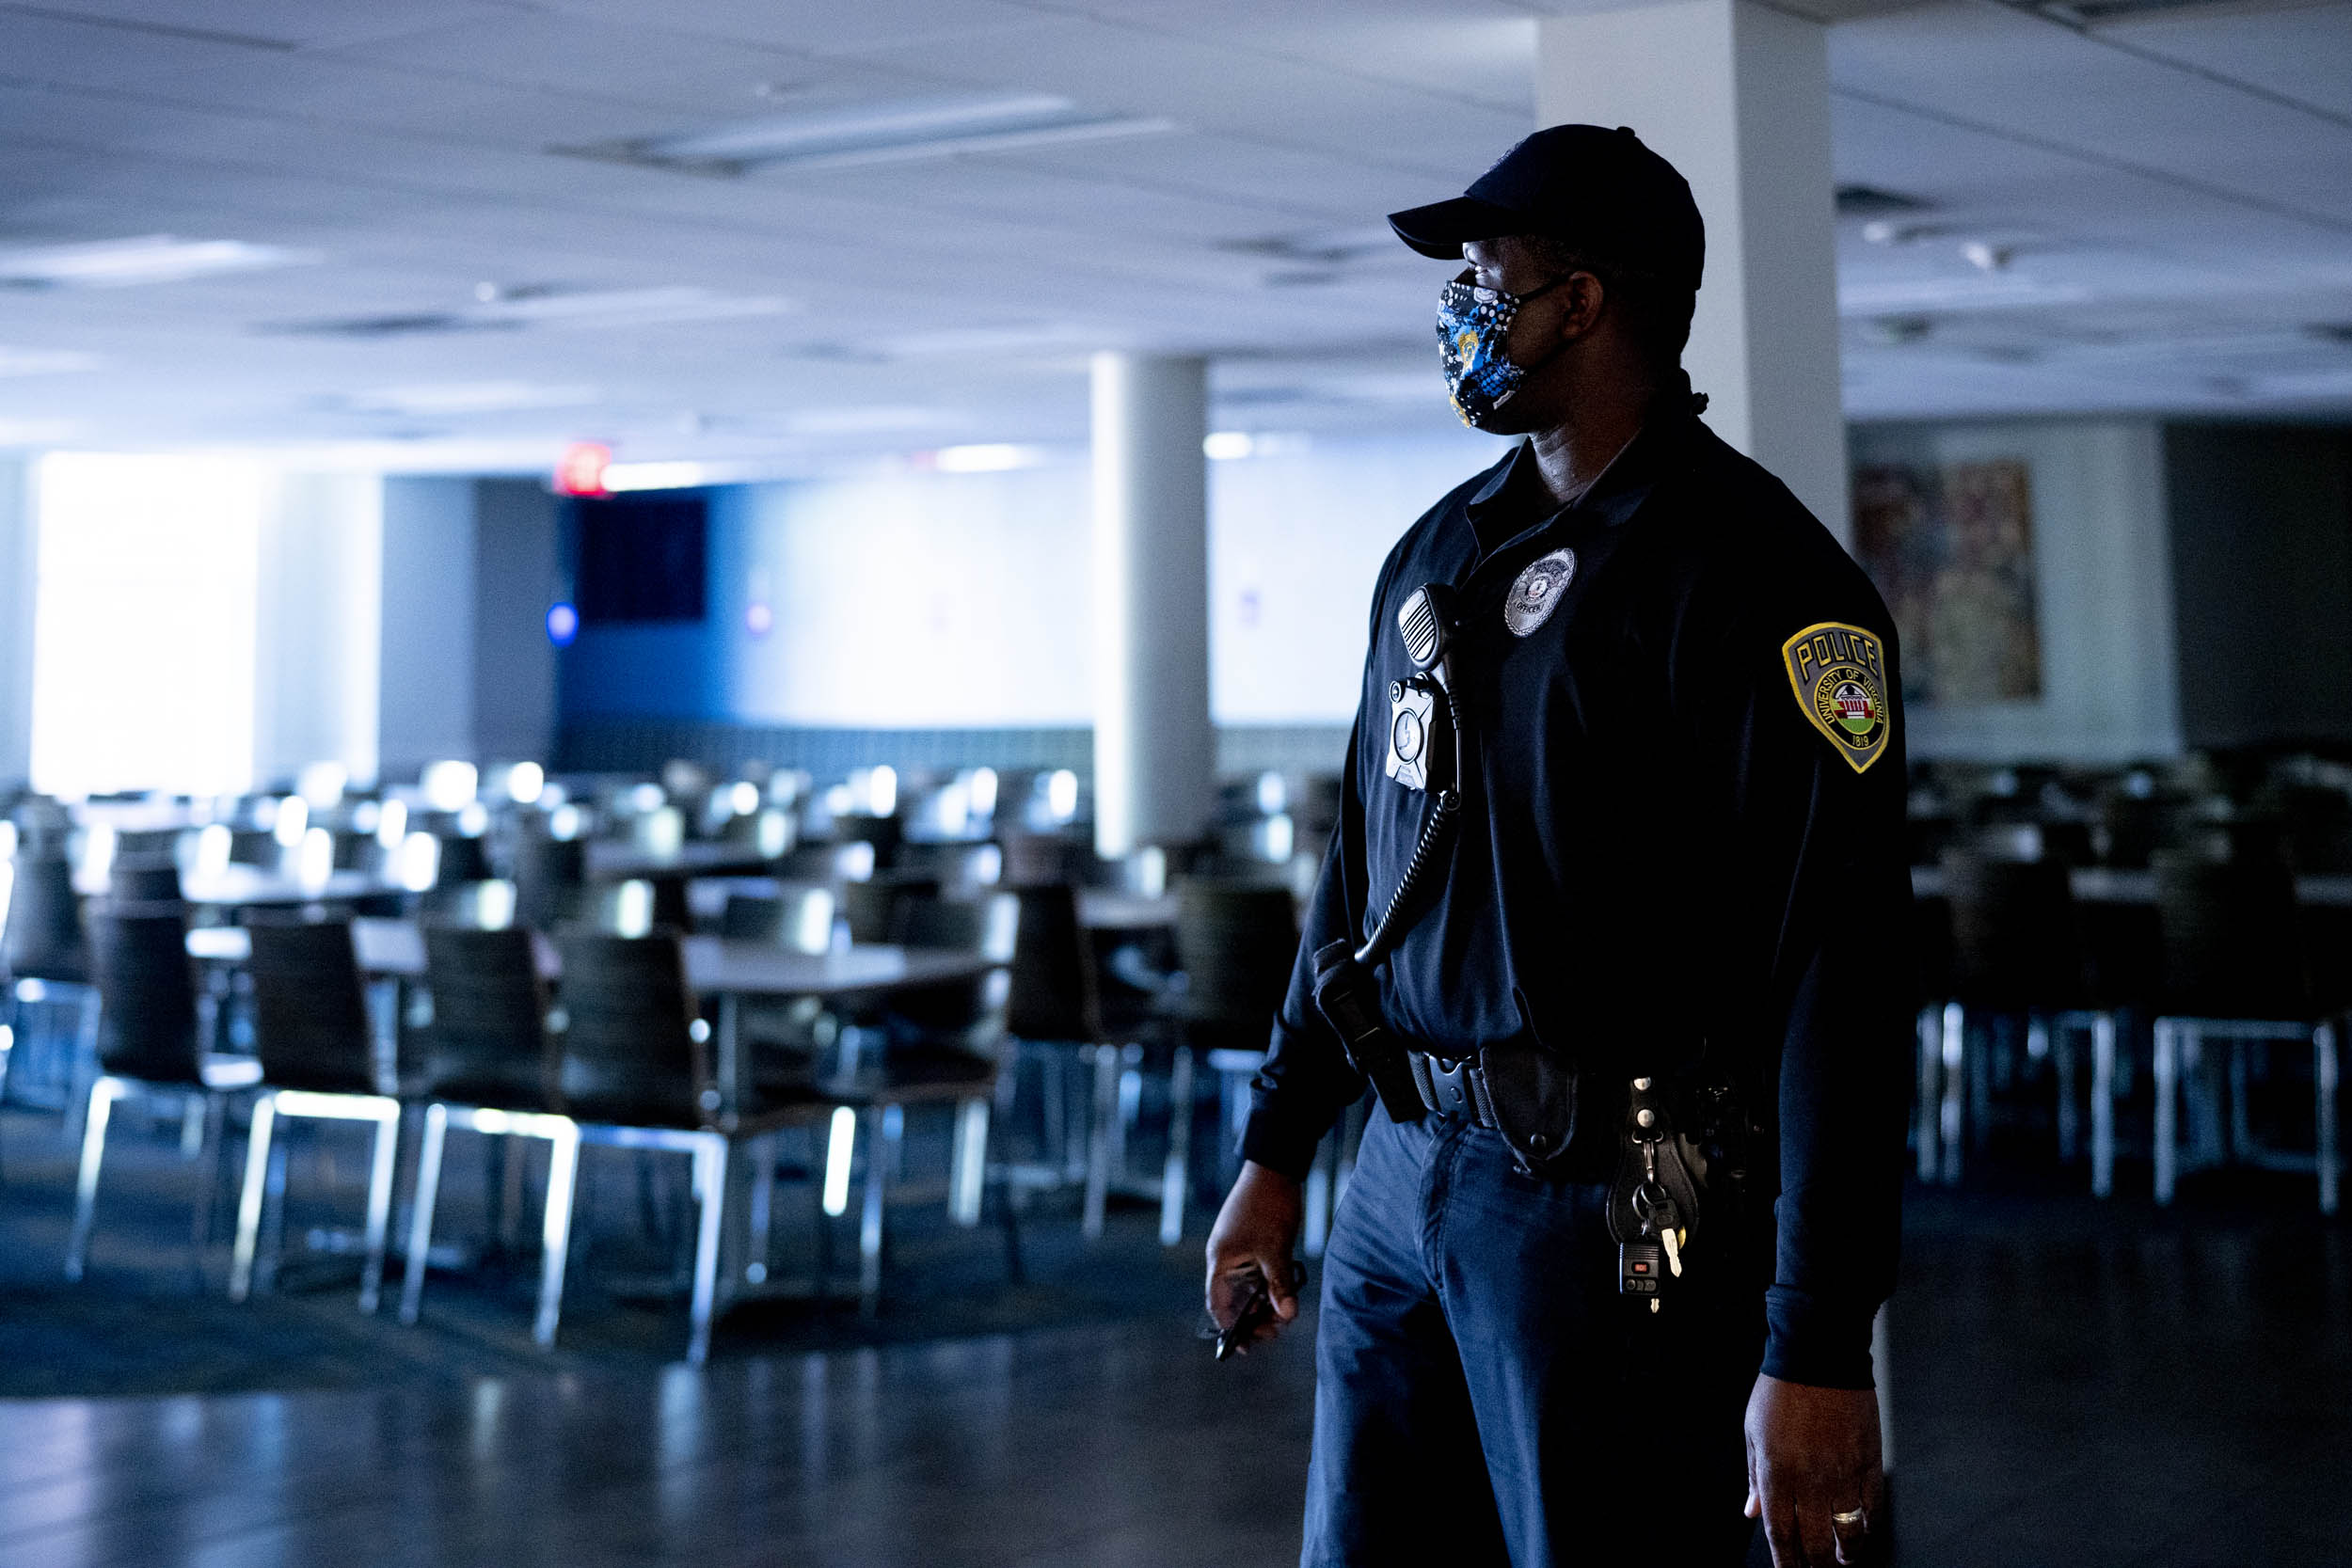 Police Officer walking through an empty UVA Building